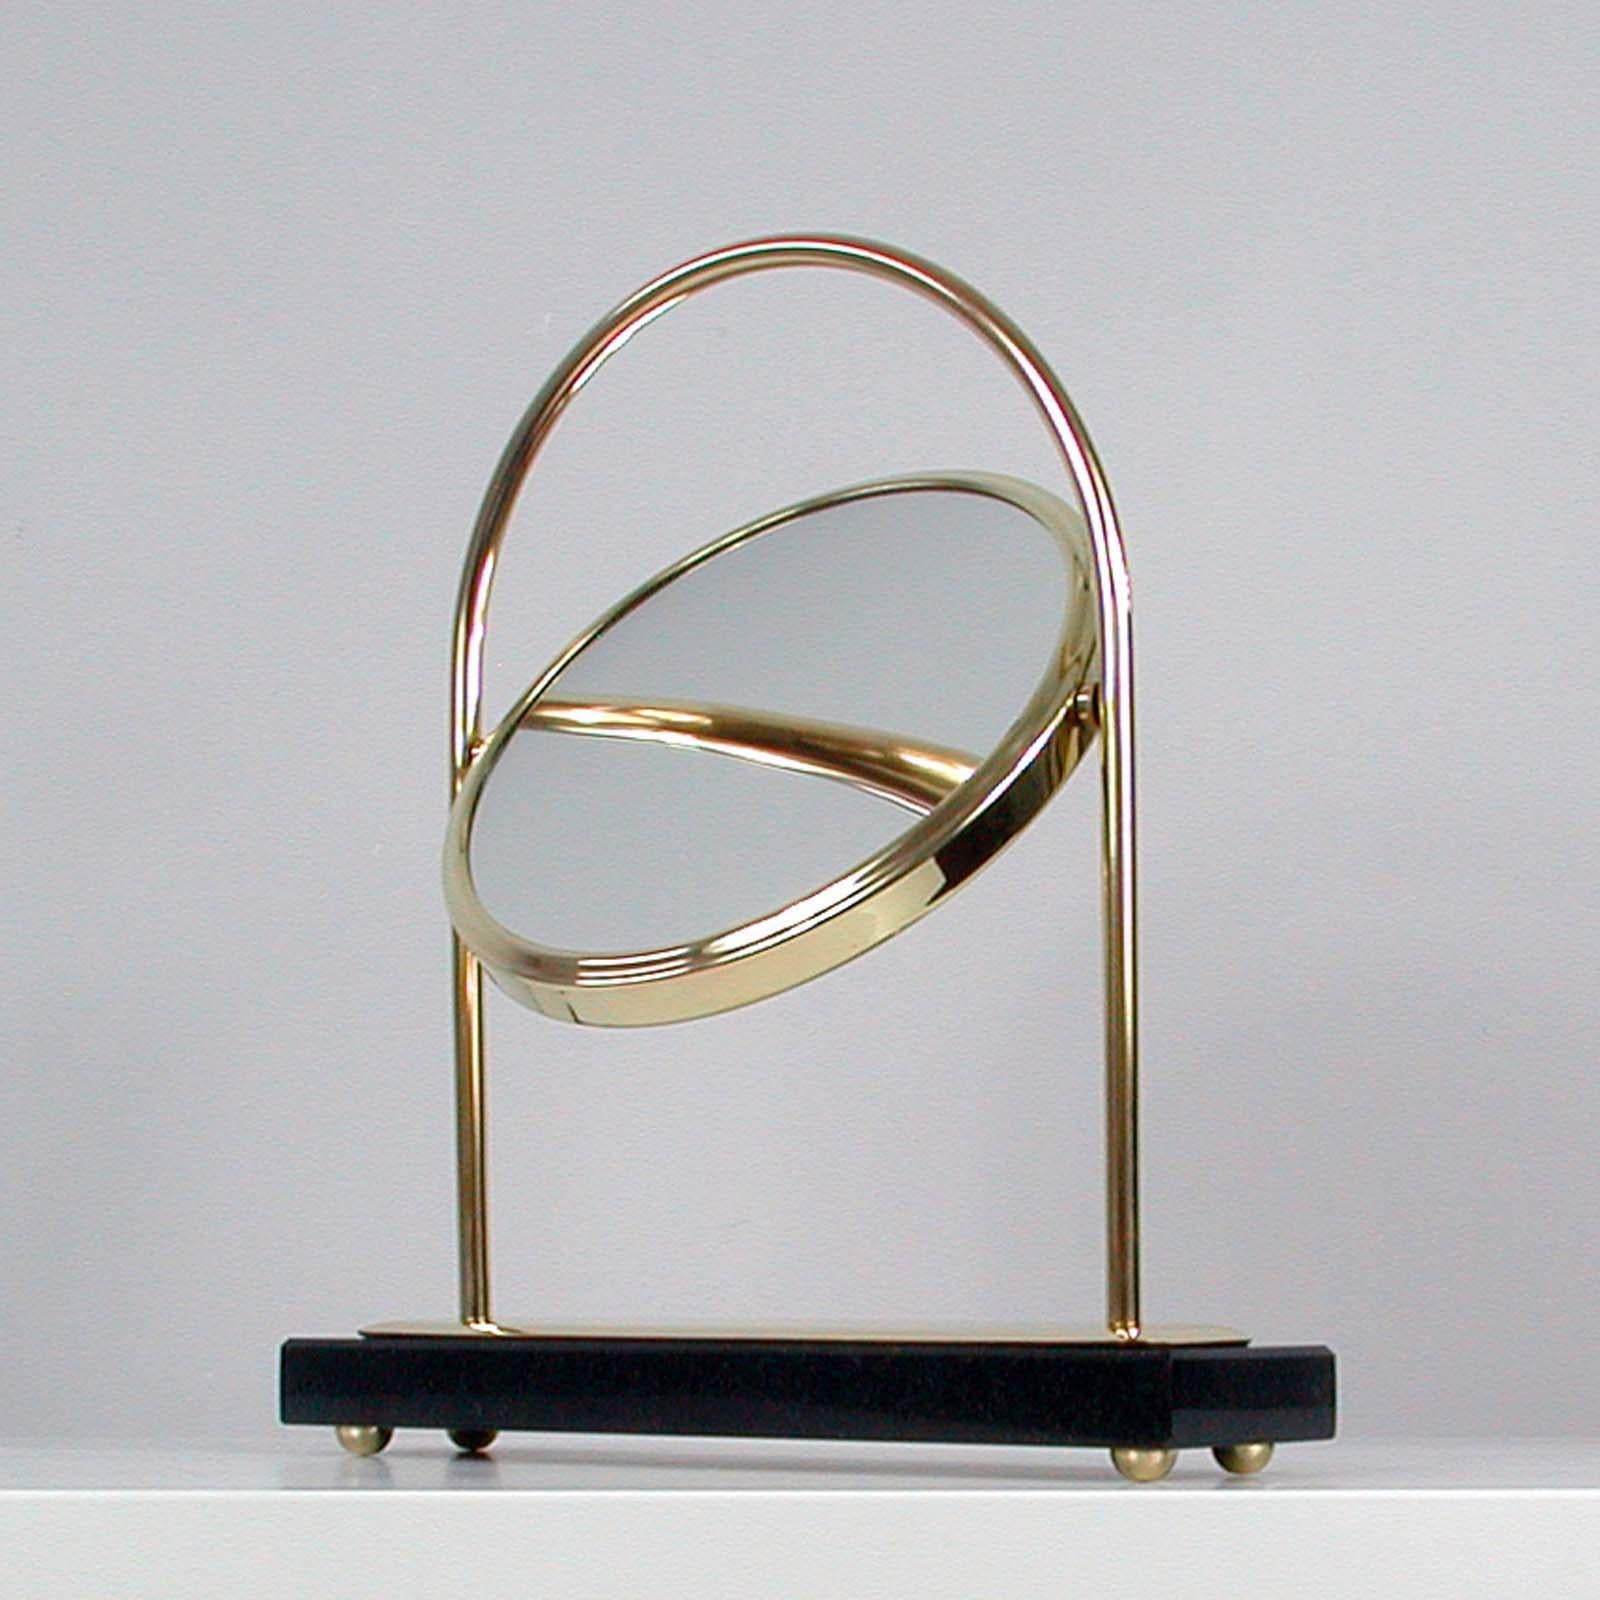 This elegant modernist table or vanity mirror was designed and manufactured in Italy in the 1950s. The mirror has got a brass frame and a black marble base (the base and the frame have been professionally polished).

The mirror has got a normal